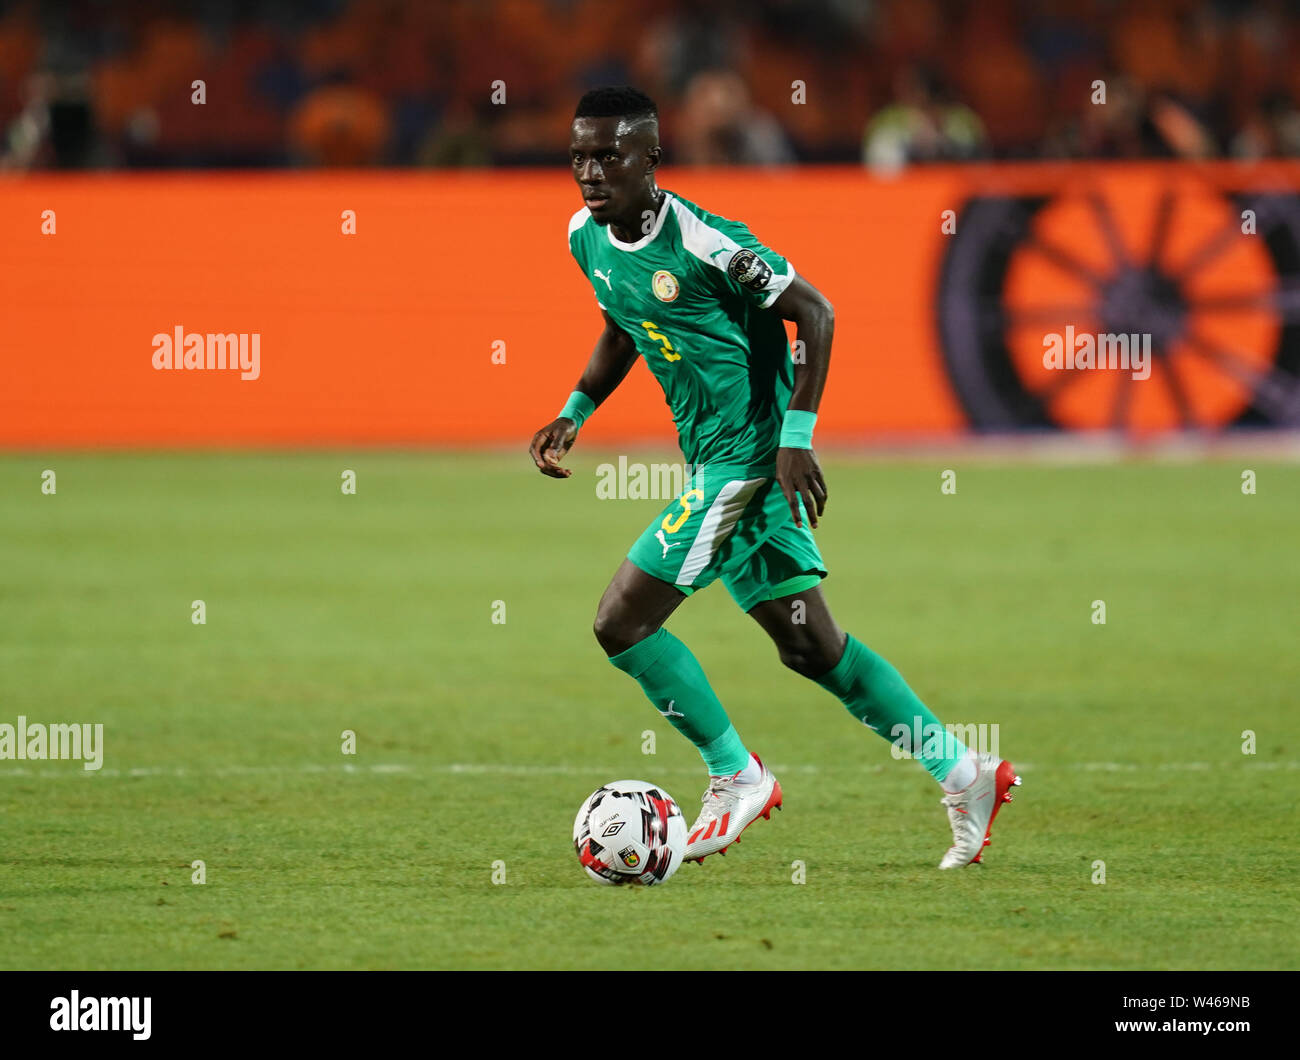 Cairo, Algeria, Egypt. 19th July, 2019. FRANCE OUT July 19, 2019: Idrissa Gana Gueye of Senegal during the Final of 2019 African Cup of Nations match between Algeria and Senegal at the Cairo International Stadium in Cairo, Egypt. Ulrik Pedersen/CSM/Alamy Live News Stock Photo